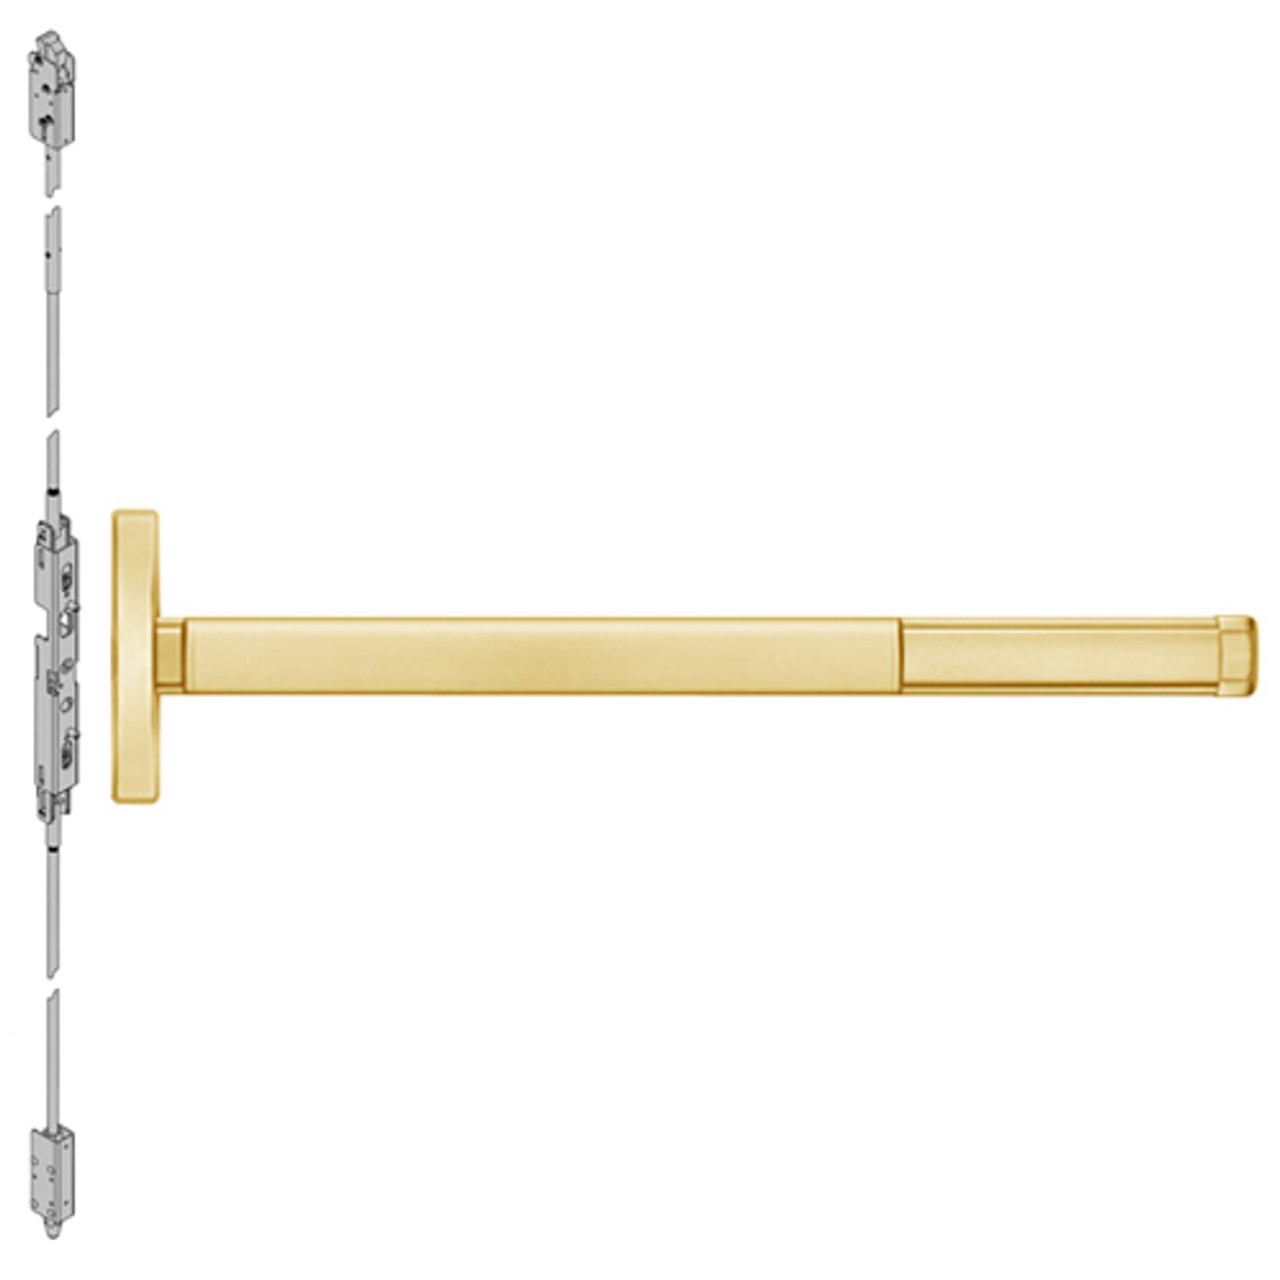 TS2603-605-36 PHI 2600 Series Concealed Vertical Rod Exit Device with Touchbar Monitoring Switch Prepped for Key Retracts Latchbolt in Bright Brass Finish